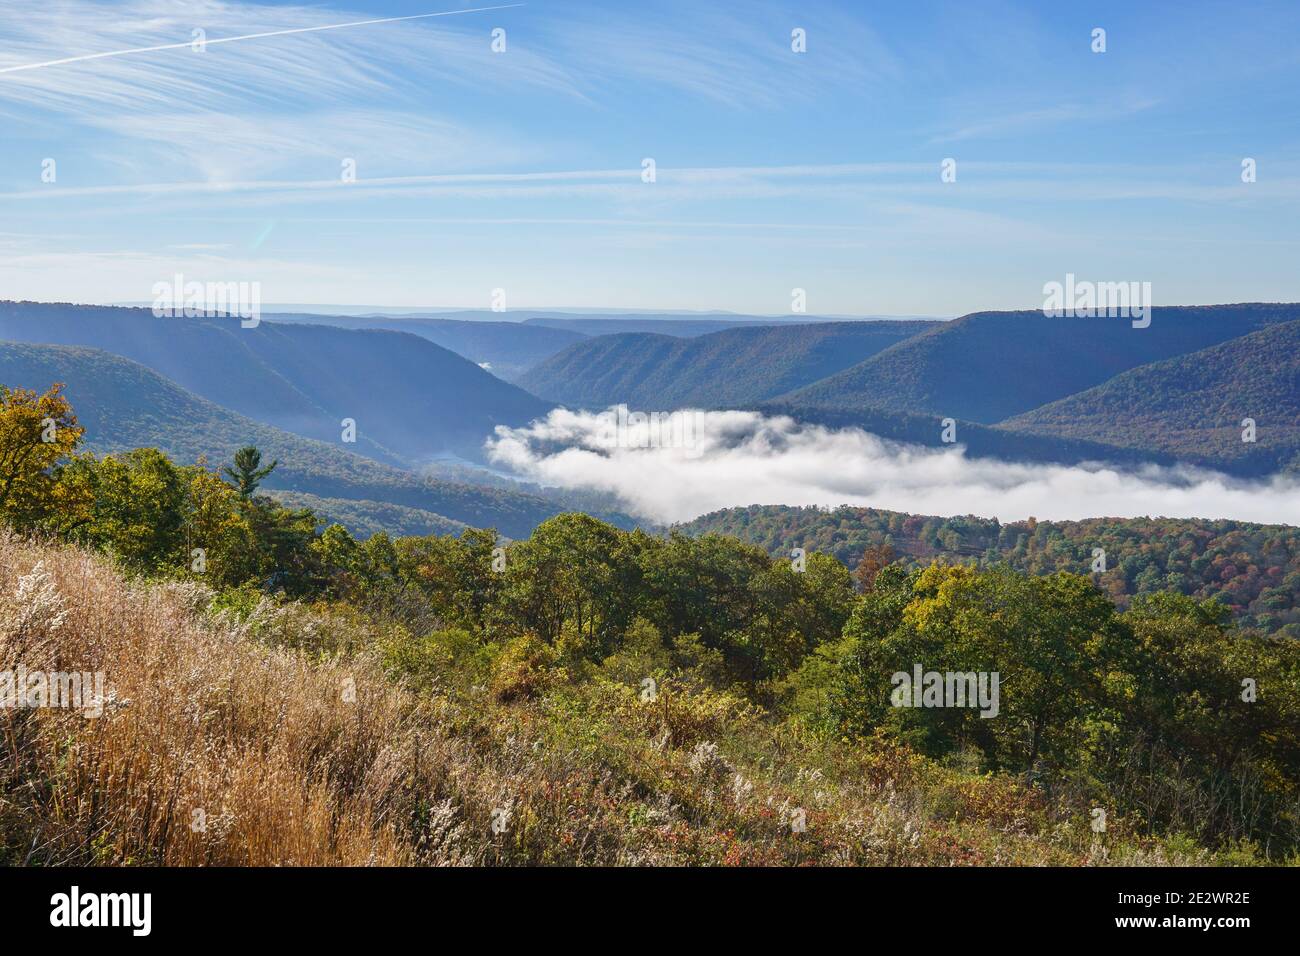 River of fog, fog filled valley, Susquehanna River in fog, Pennslvania mountains, Hyner view state park, Renovo, Clinton County, Pennsylvania Stock Photo